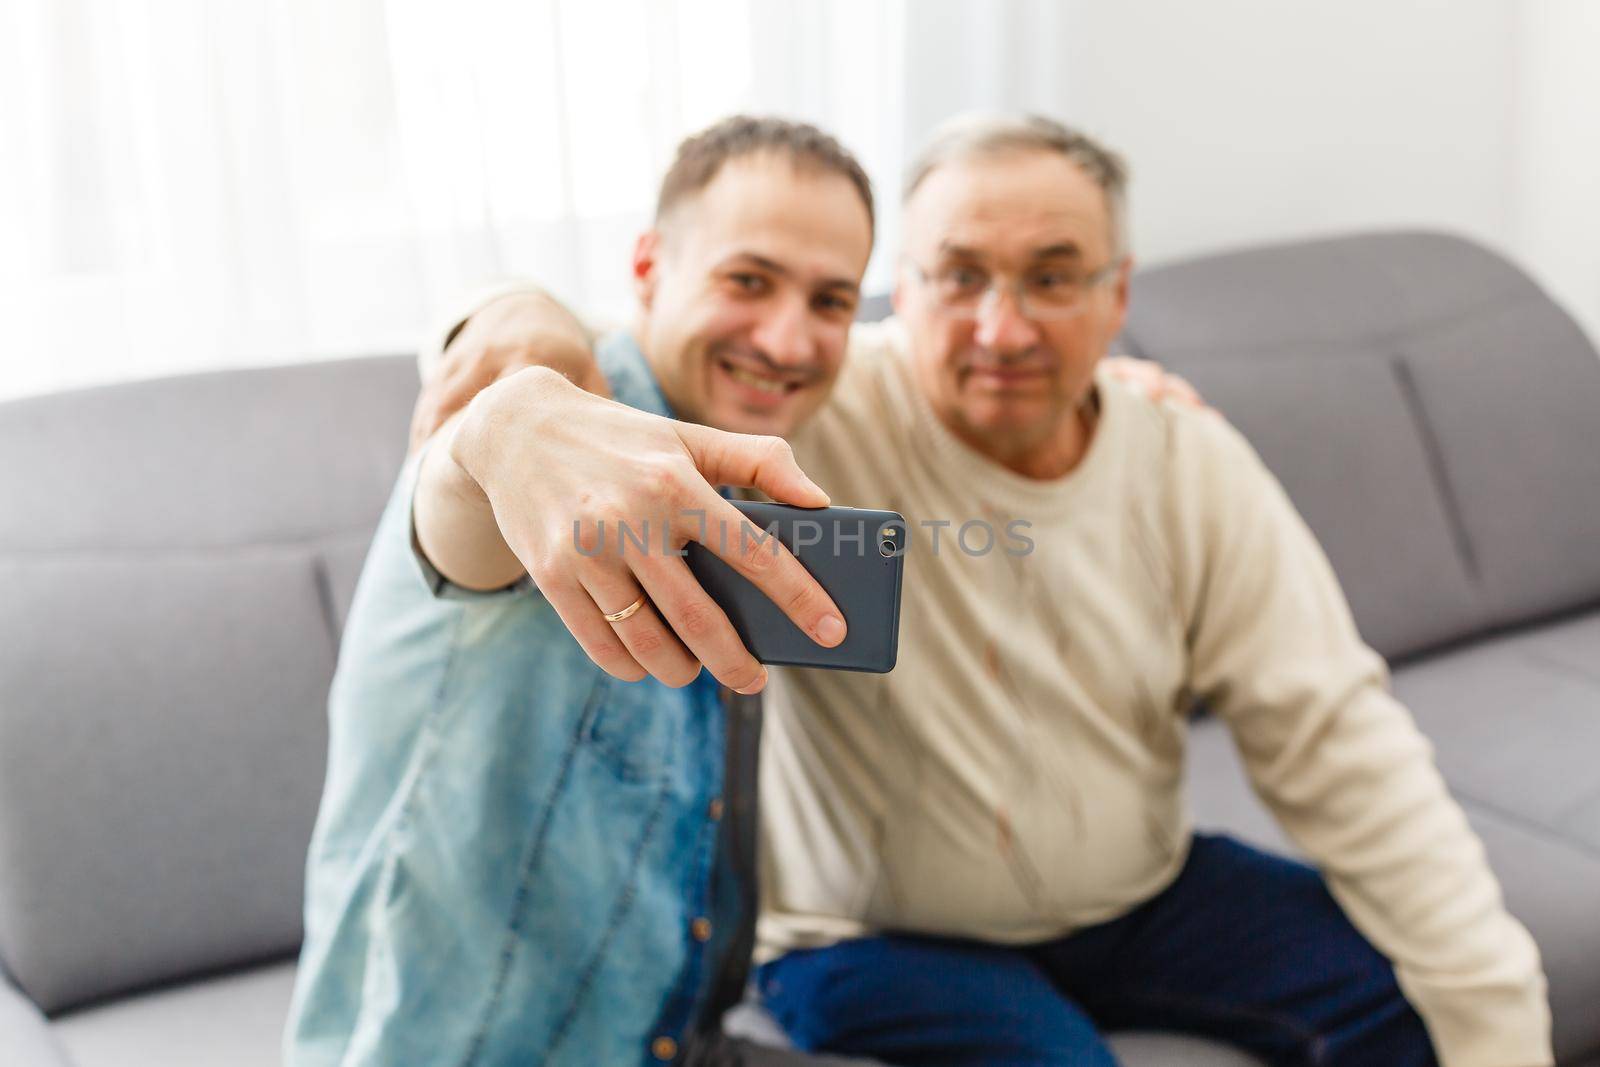 Happy moment. Cheerful young man taking a selfie with his upbeat elderly father waving at the camera and smiling pleasantly